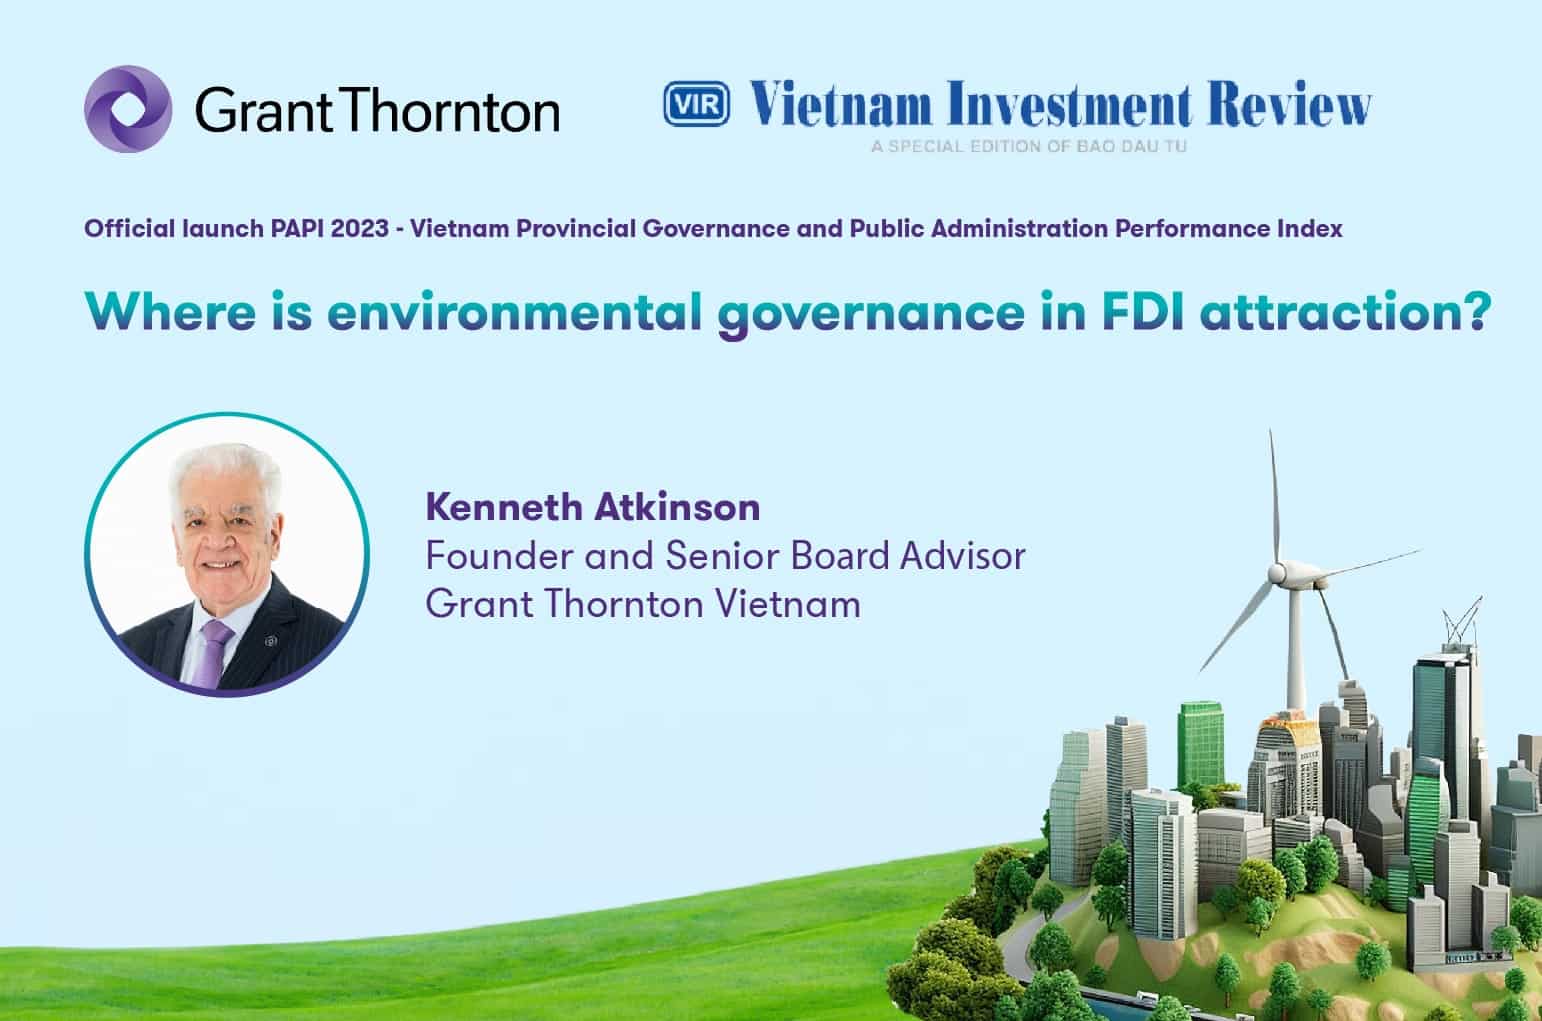 Where is environmental governance in FDI attraction?